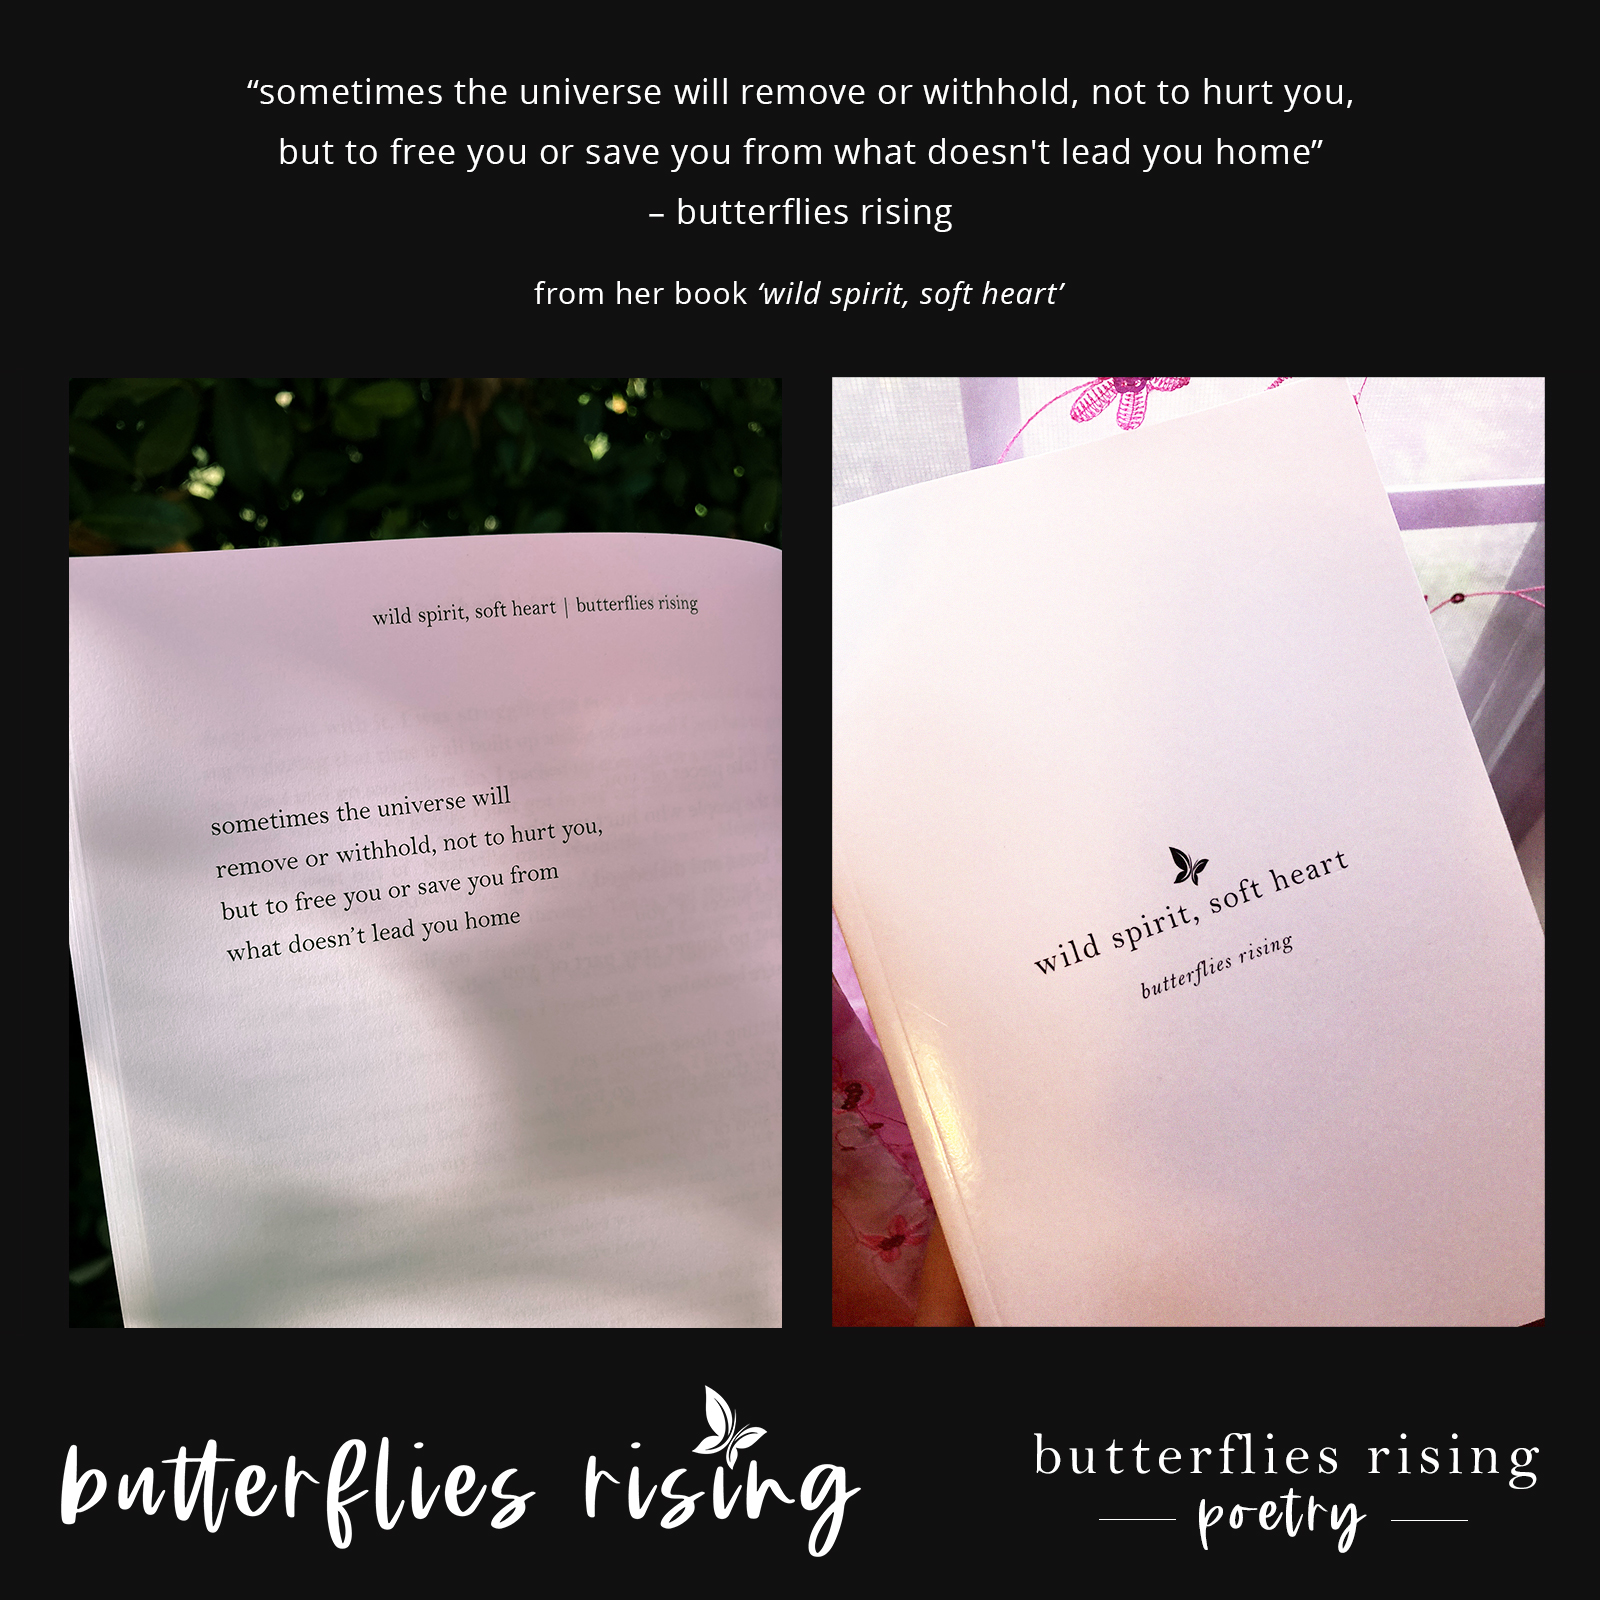 sometimes the universe will remove or withhold, not to hurt you - butterflies rising